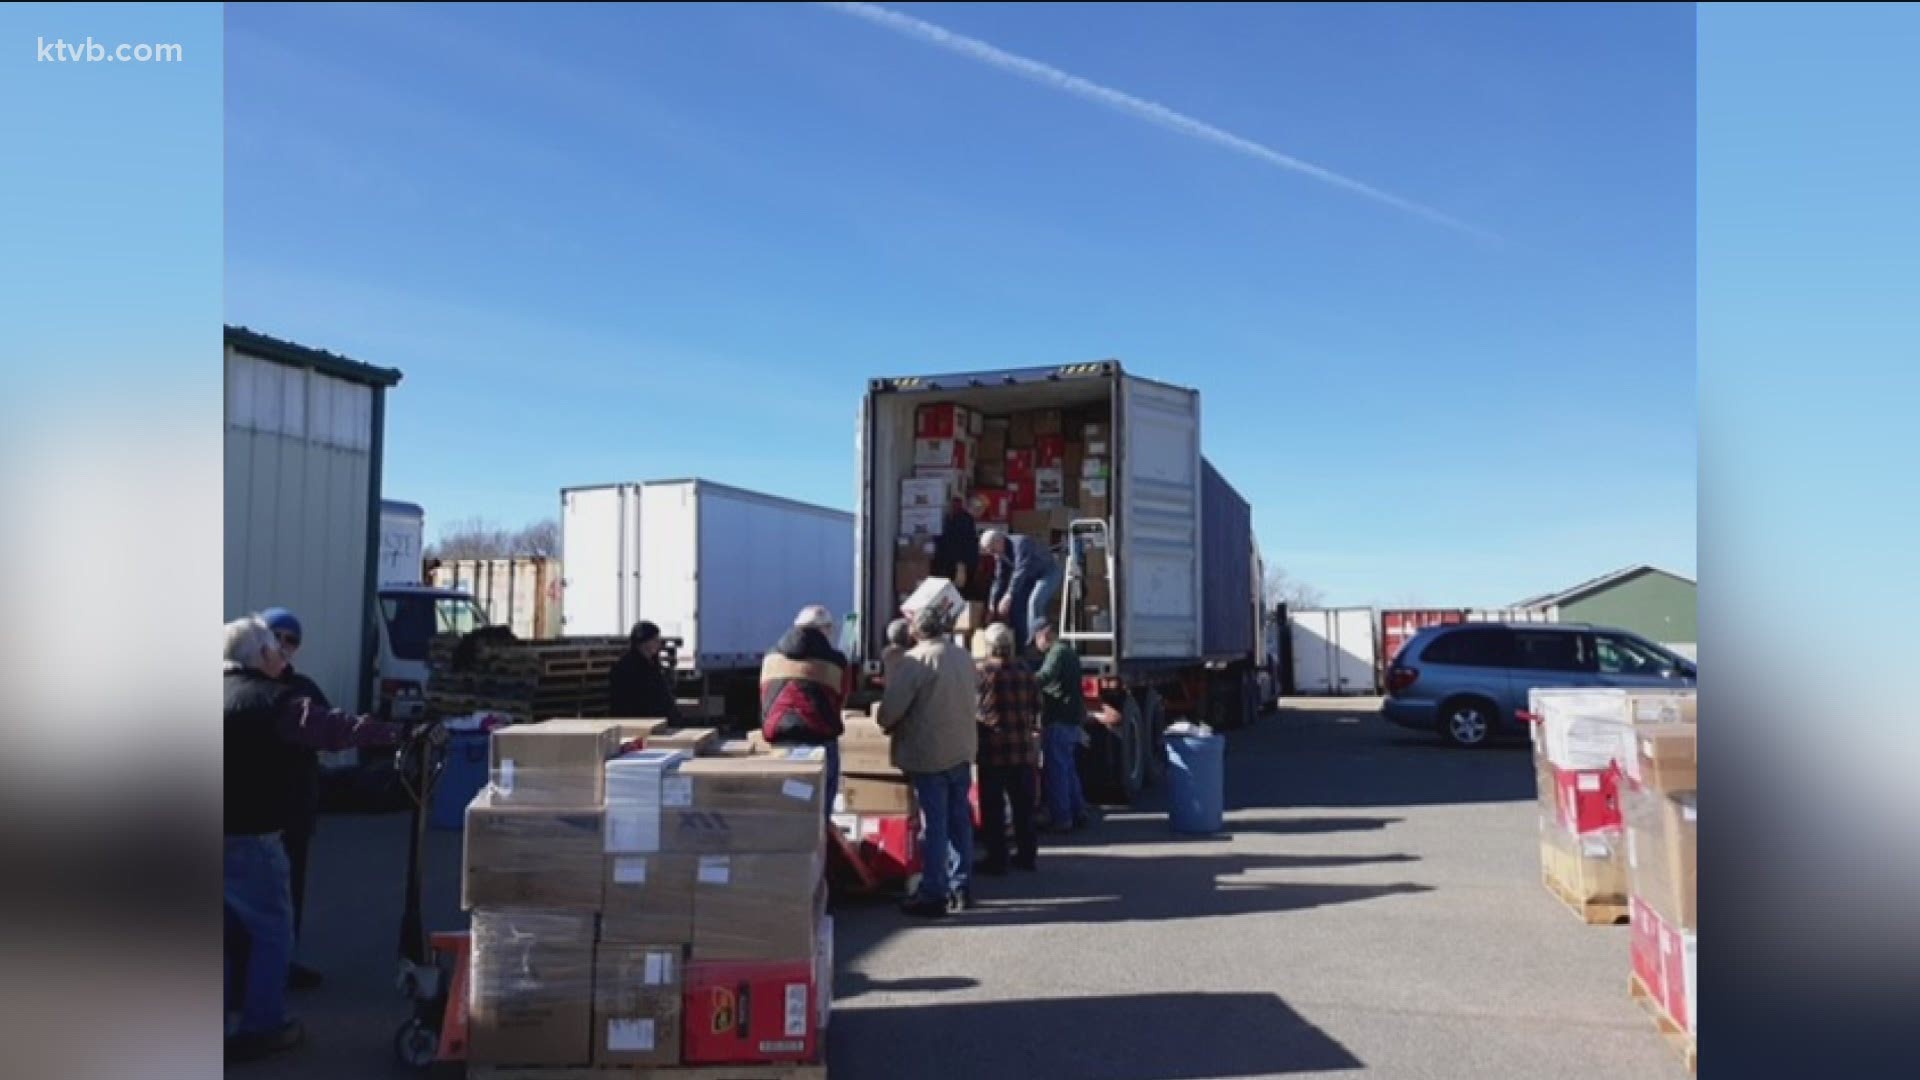 The Nampa nonprofit is shipping $384,000 worth of medical supplies to help those in need.